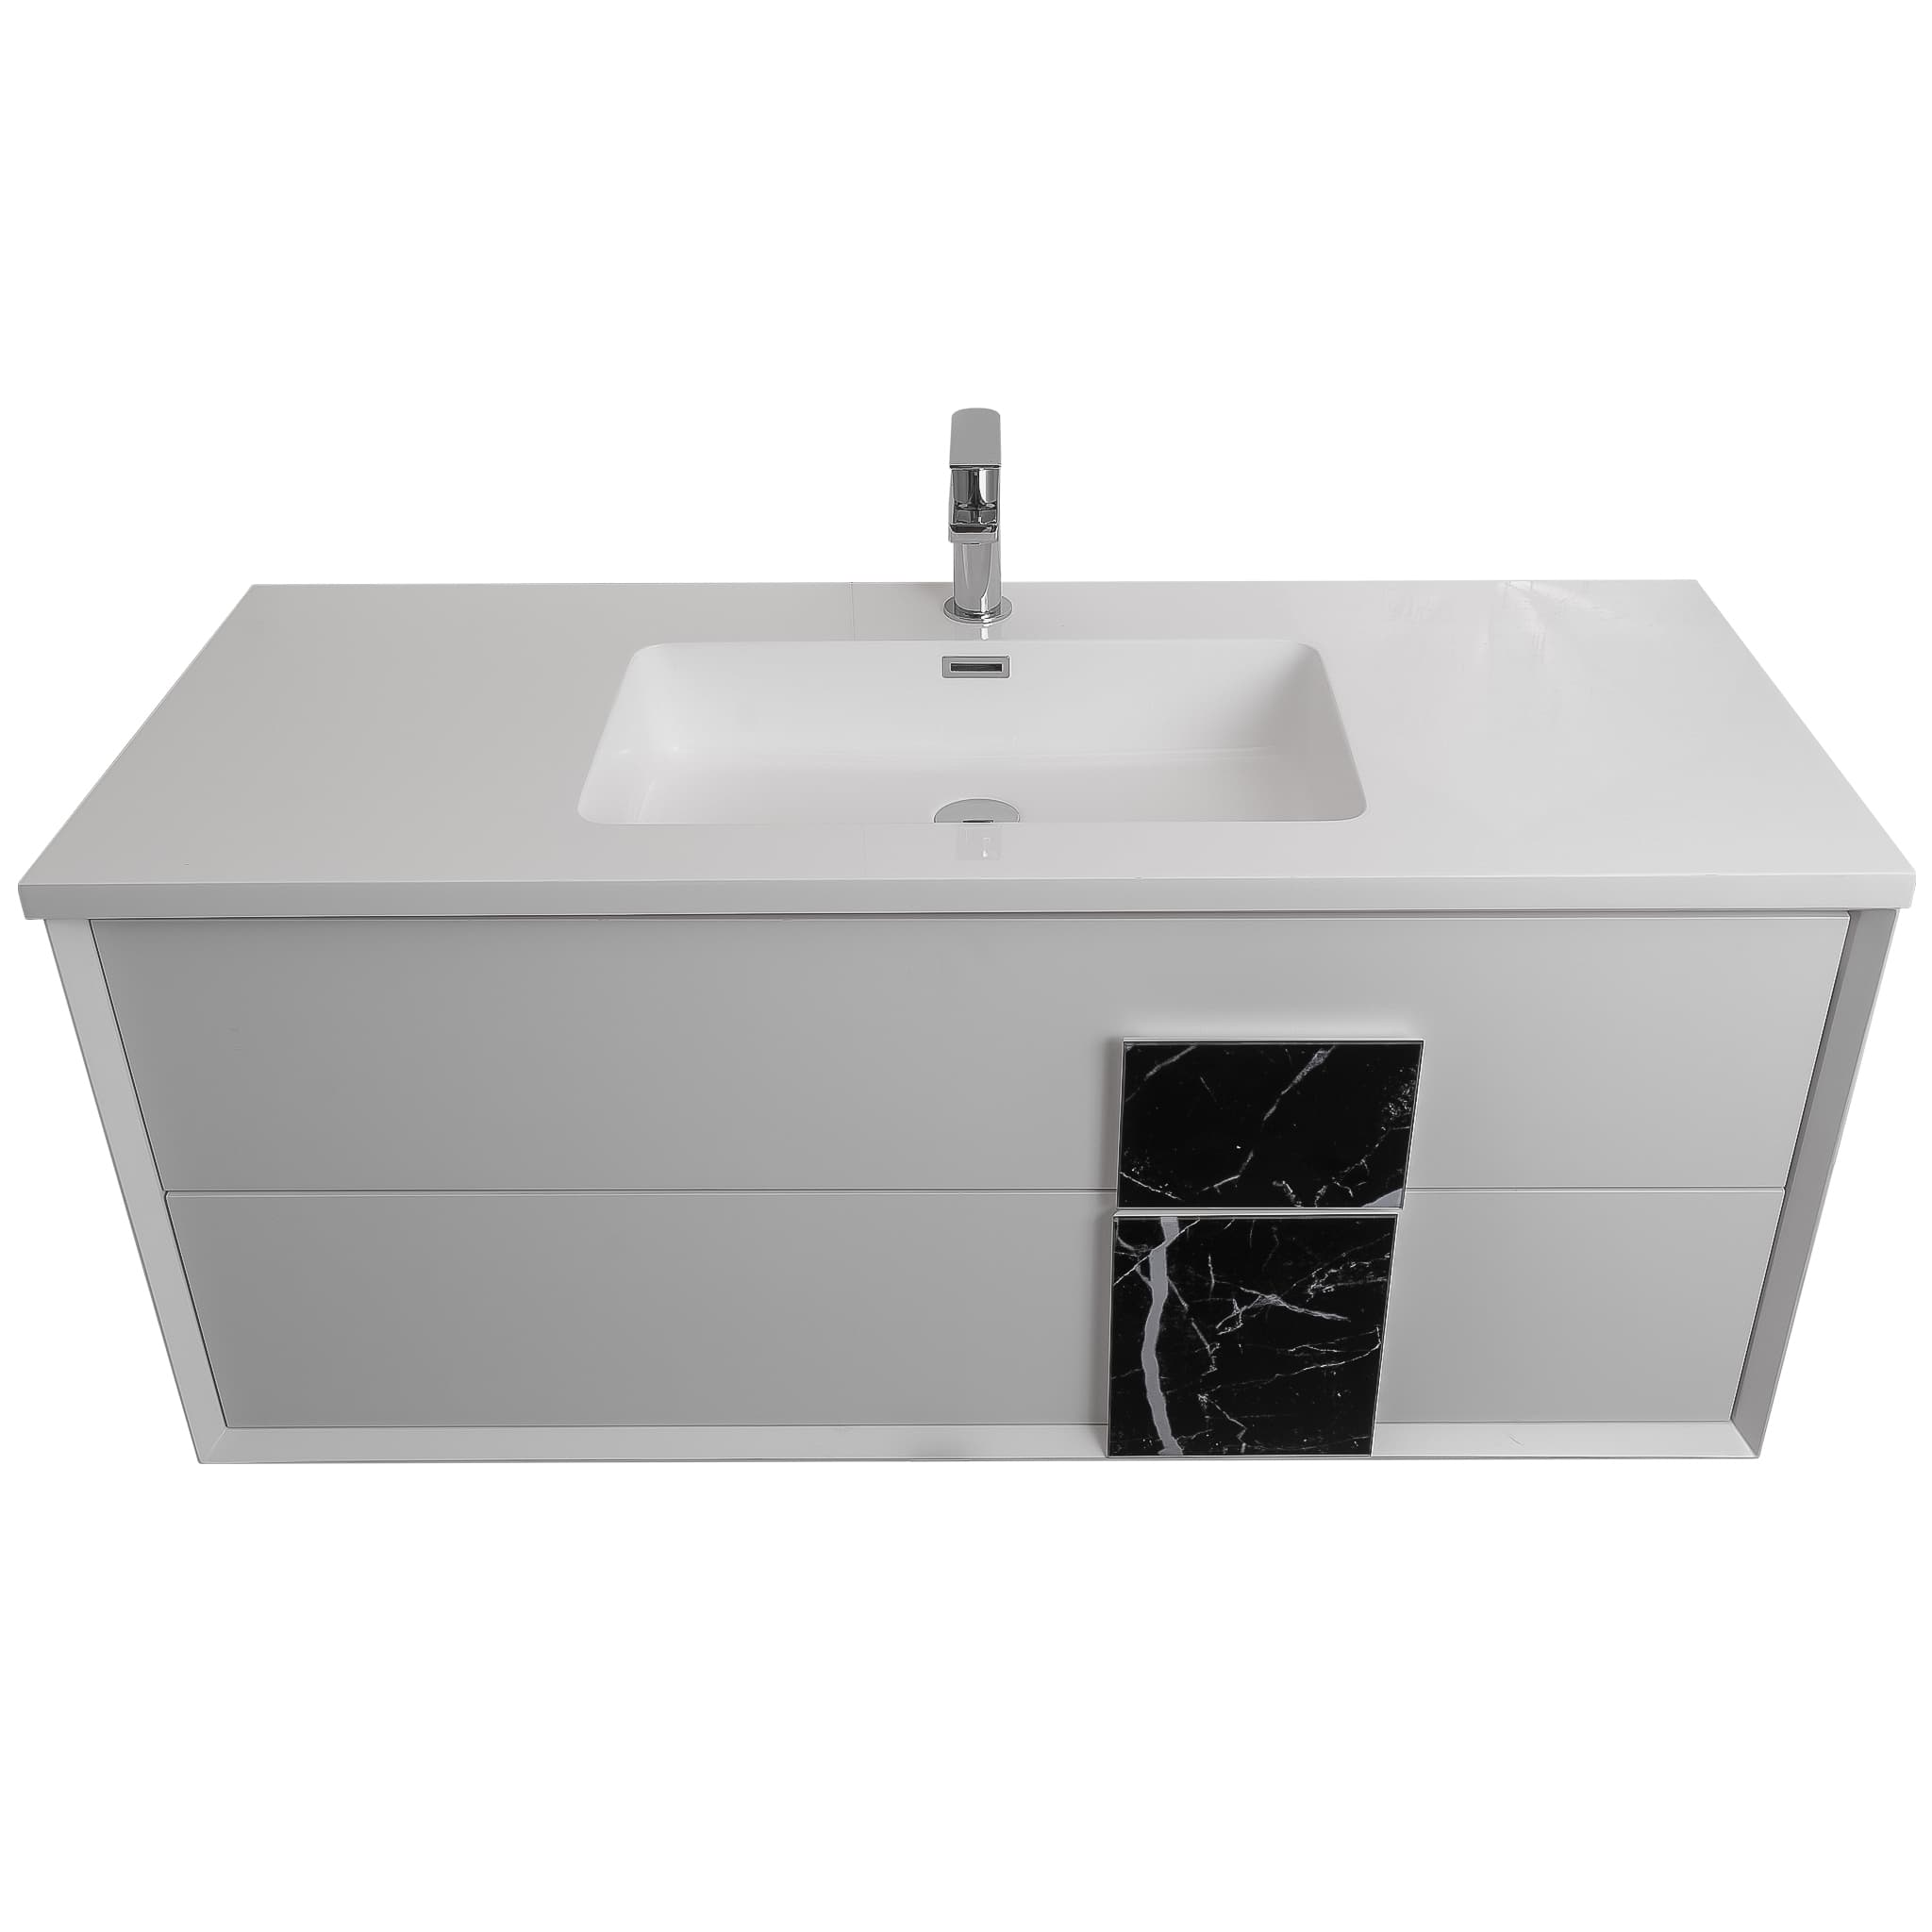 Piazza 47.5 Matte White With Black Marble Handle  Cabinet, Square Cultured Marble Sink, Wall Mounted Modern Vanity Set